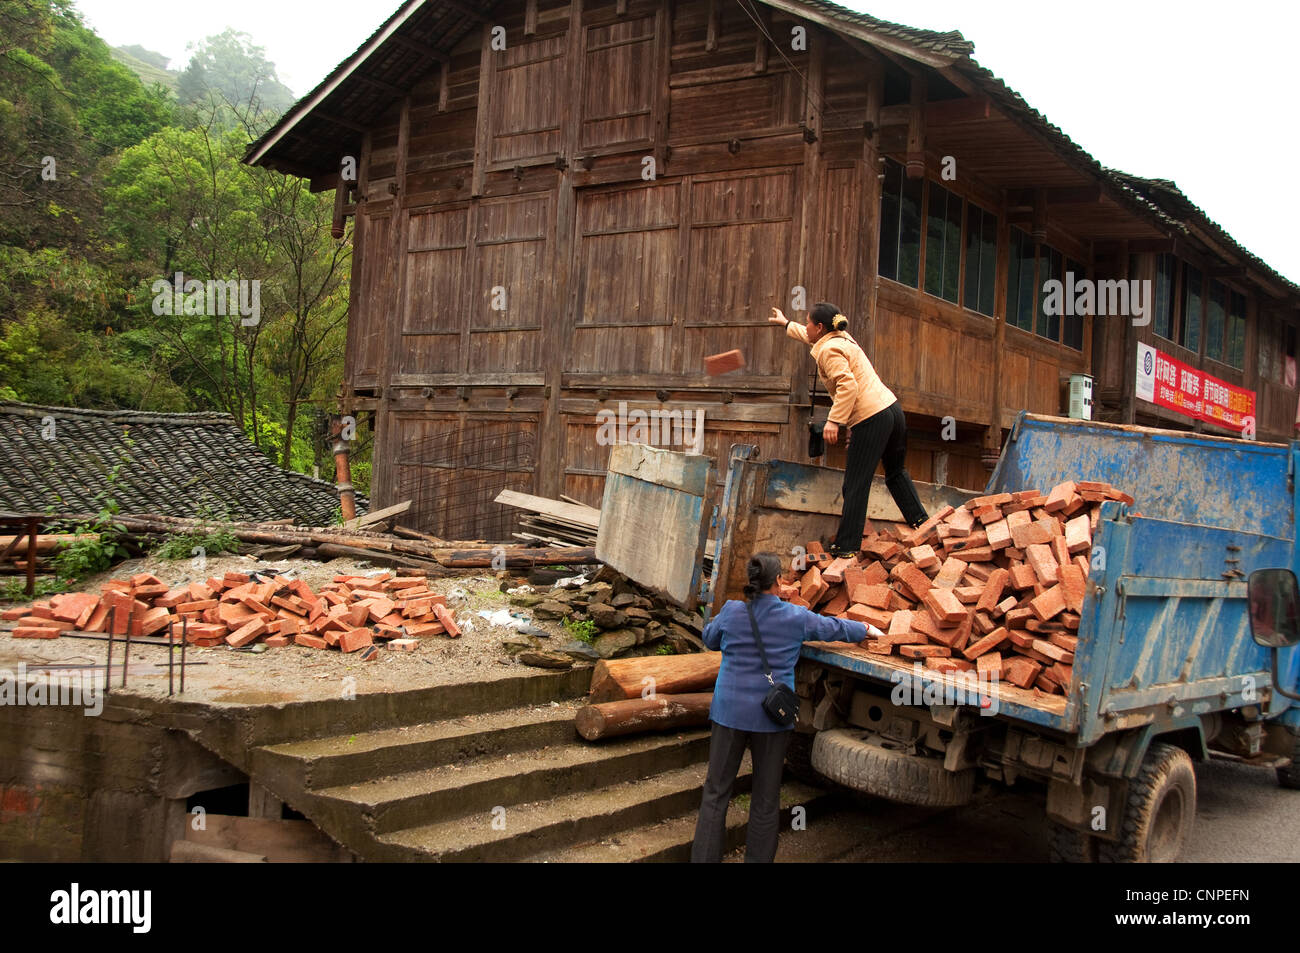 Two women unloading bricks from a truck, Southern China Stock Photo